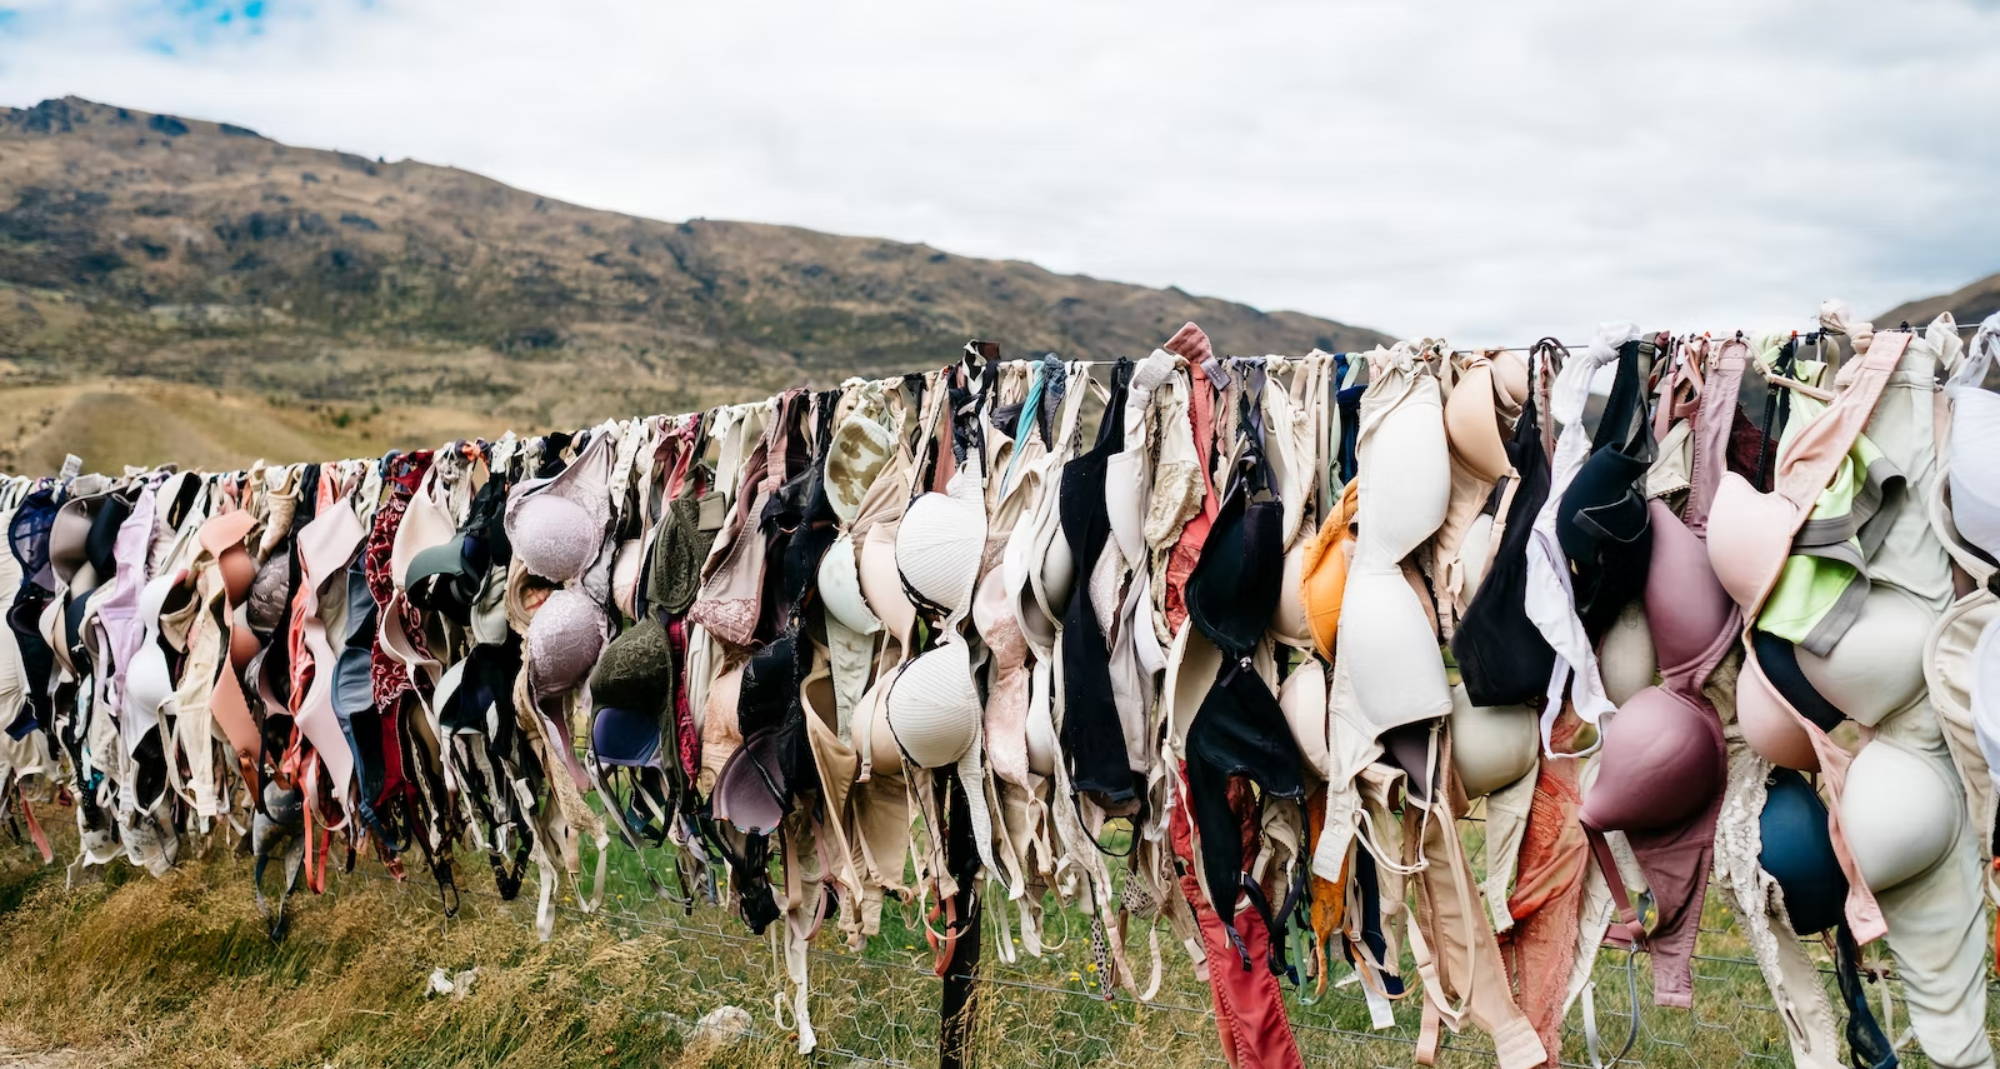 hundreds of old bras hanging from a wire in a grassy field